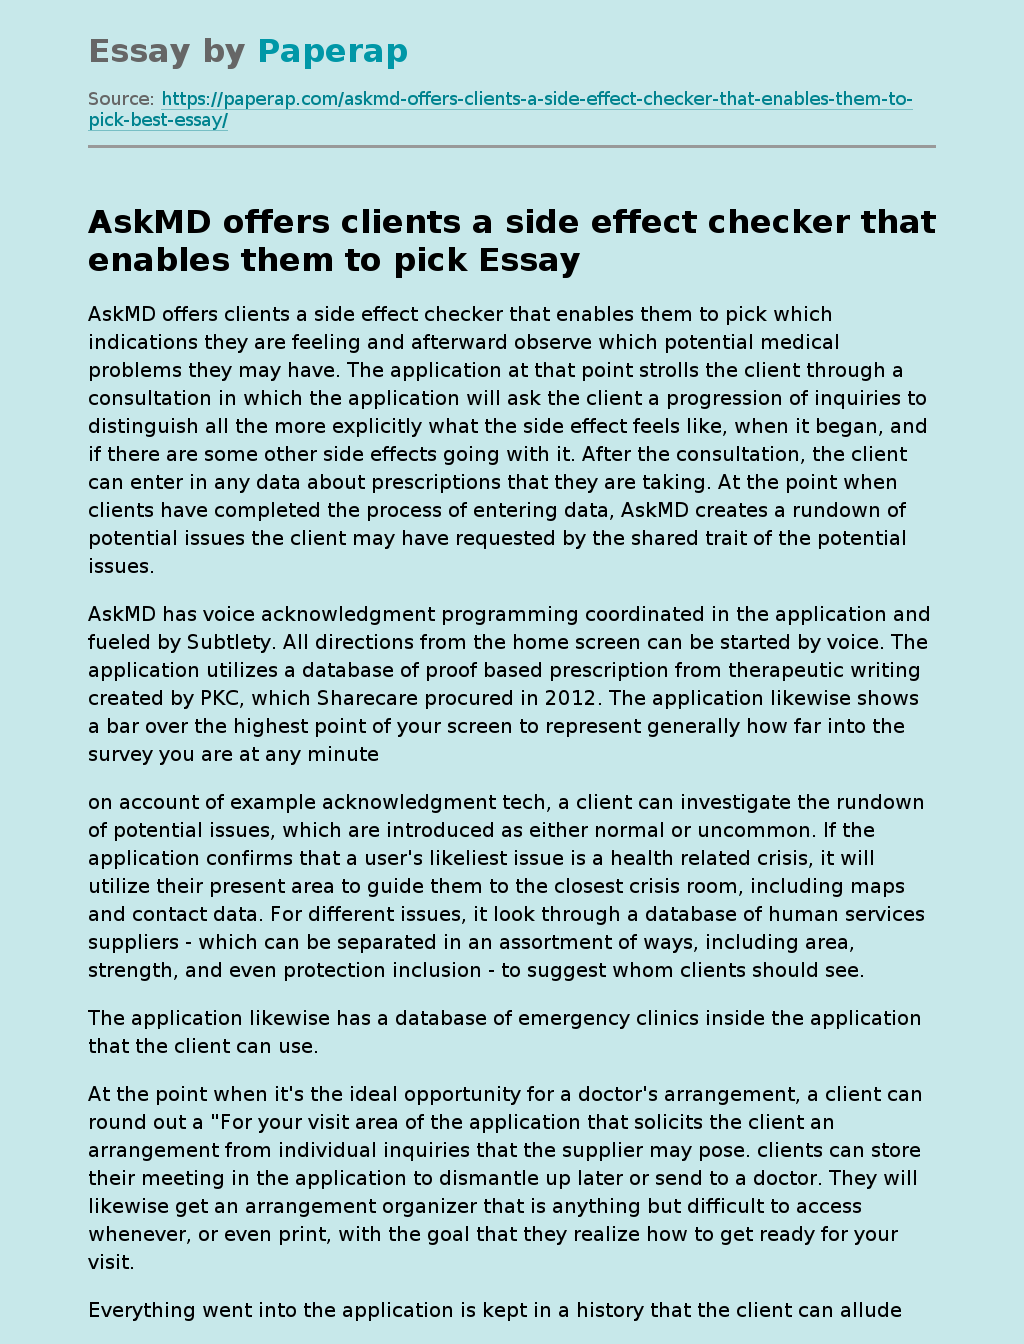 AskMD offers clients a side effect checker that enables them to pick